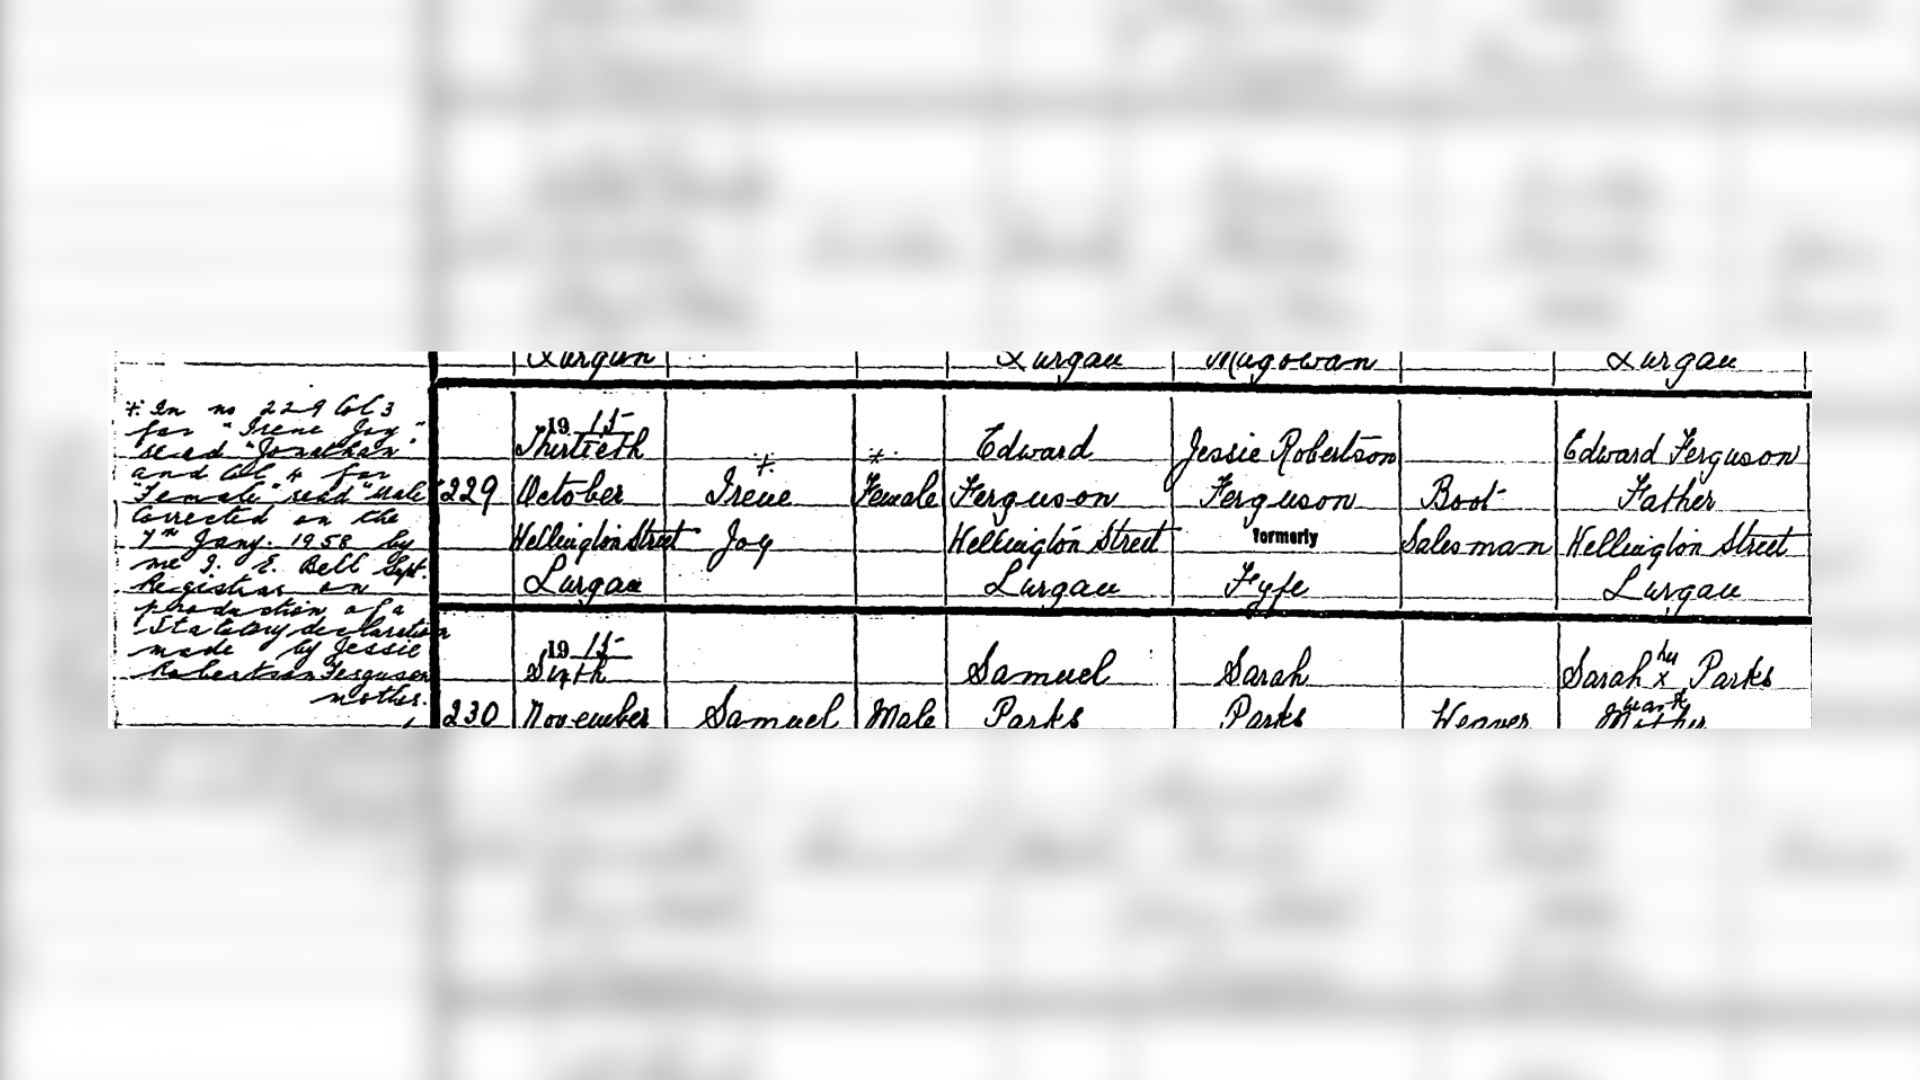 Birth record for Irene Joy Ferguson of Lurgan, Co. Armagh amended to reflect Jonathan Ferguson's gender reassignment in January 1958.